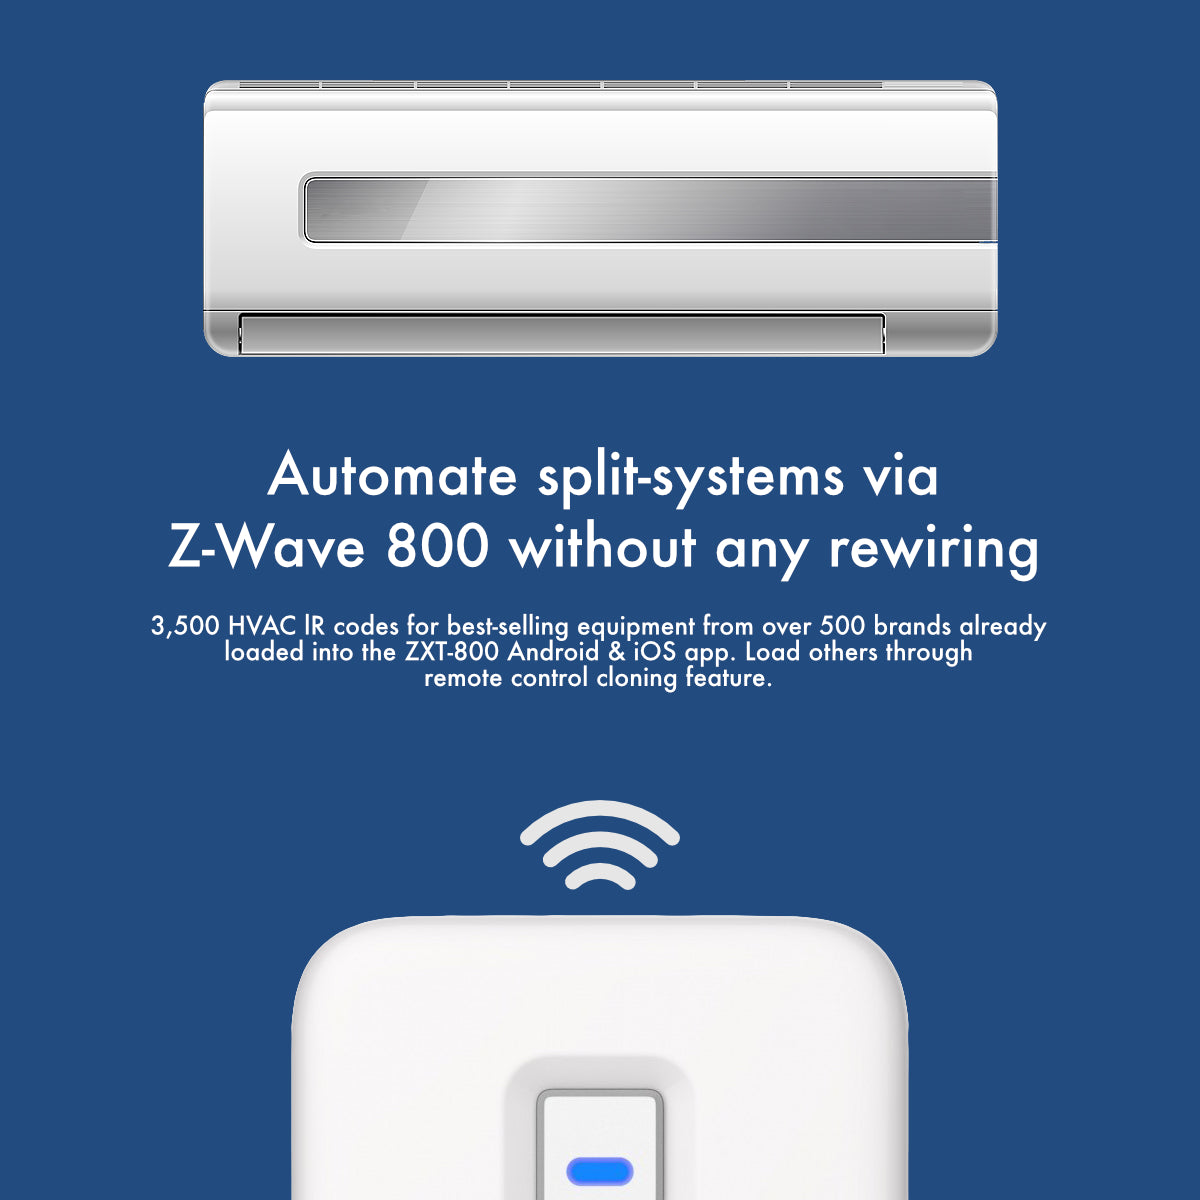 Automate HVAC systems from over 500 brands